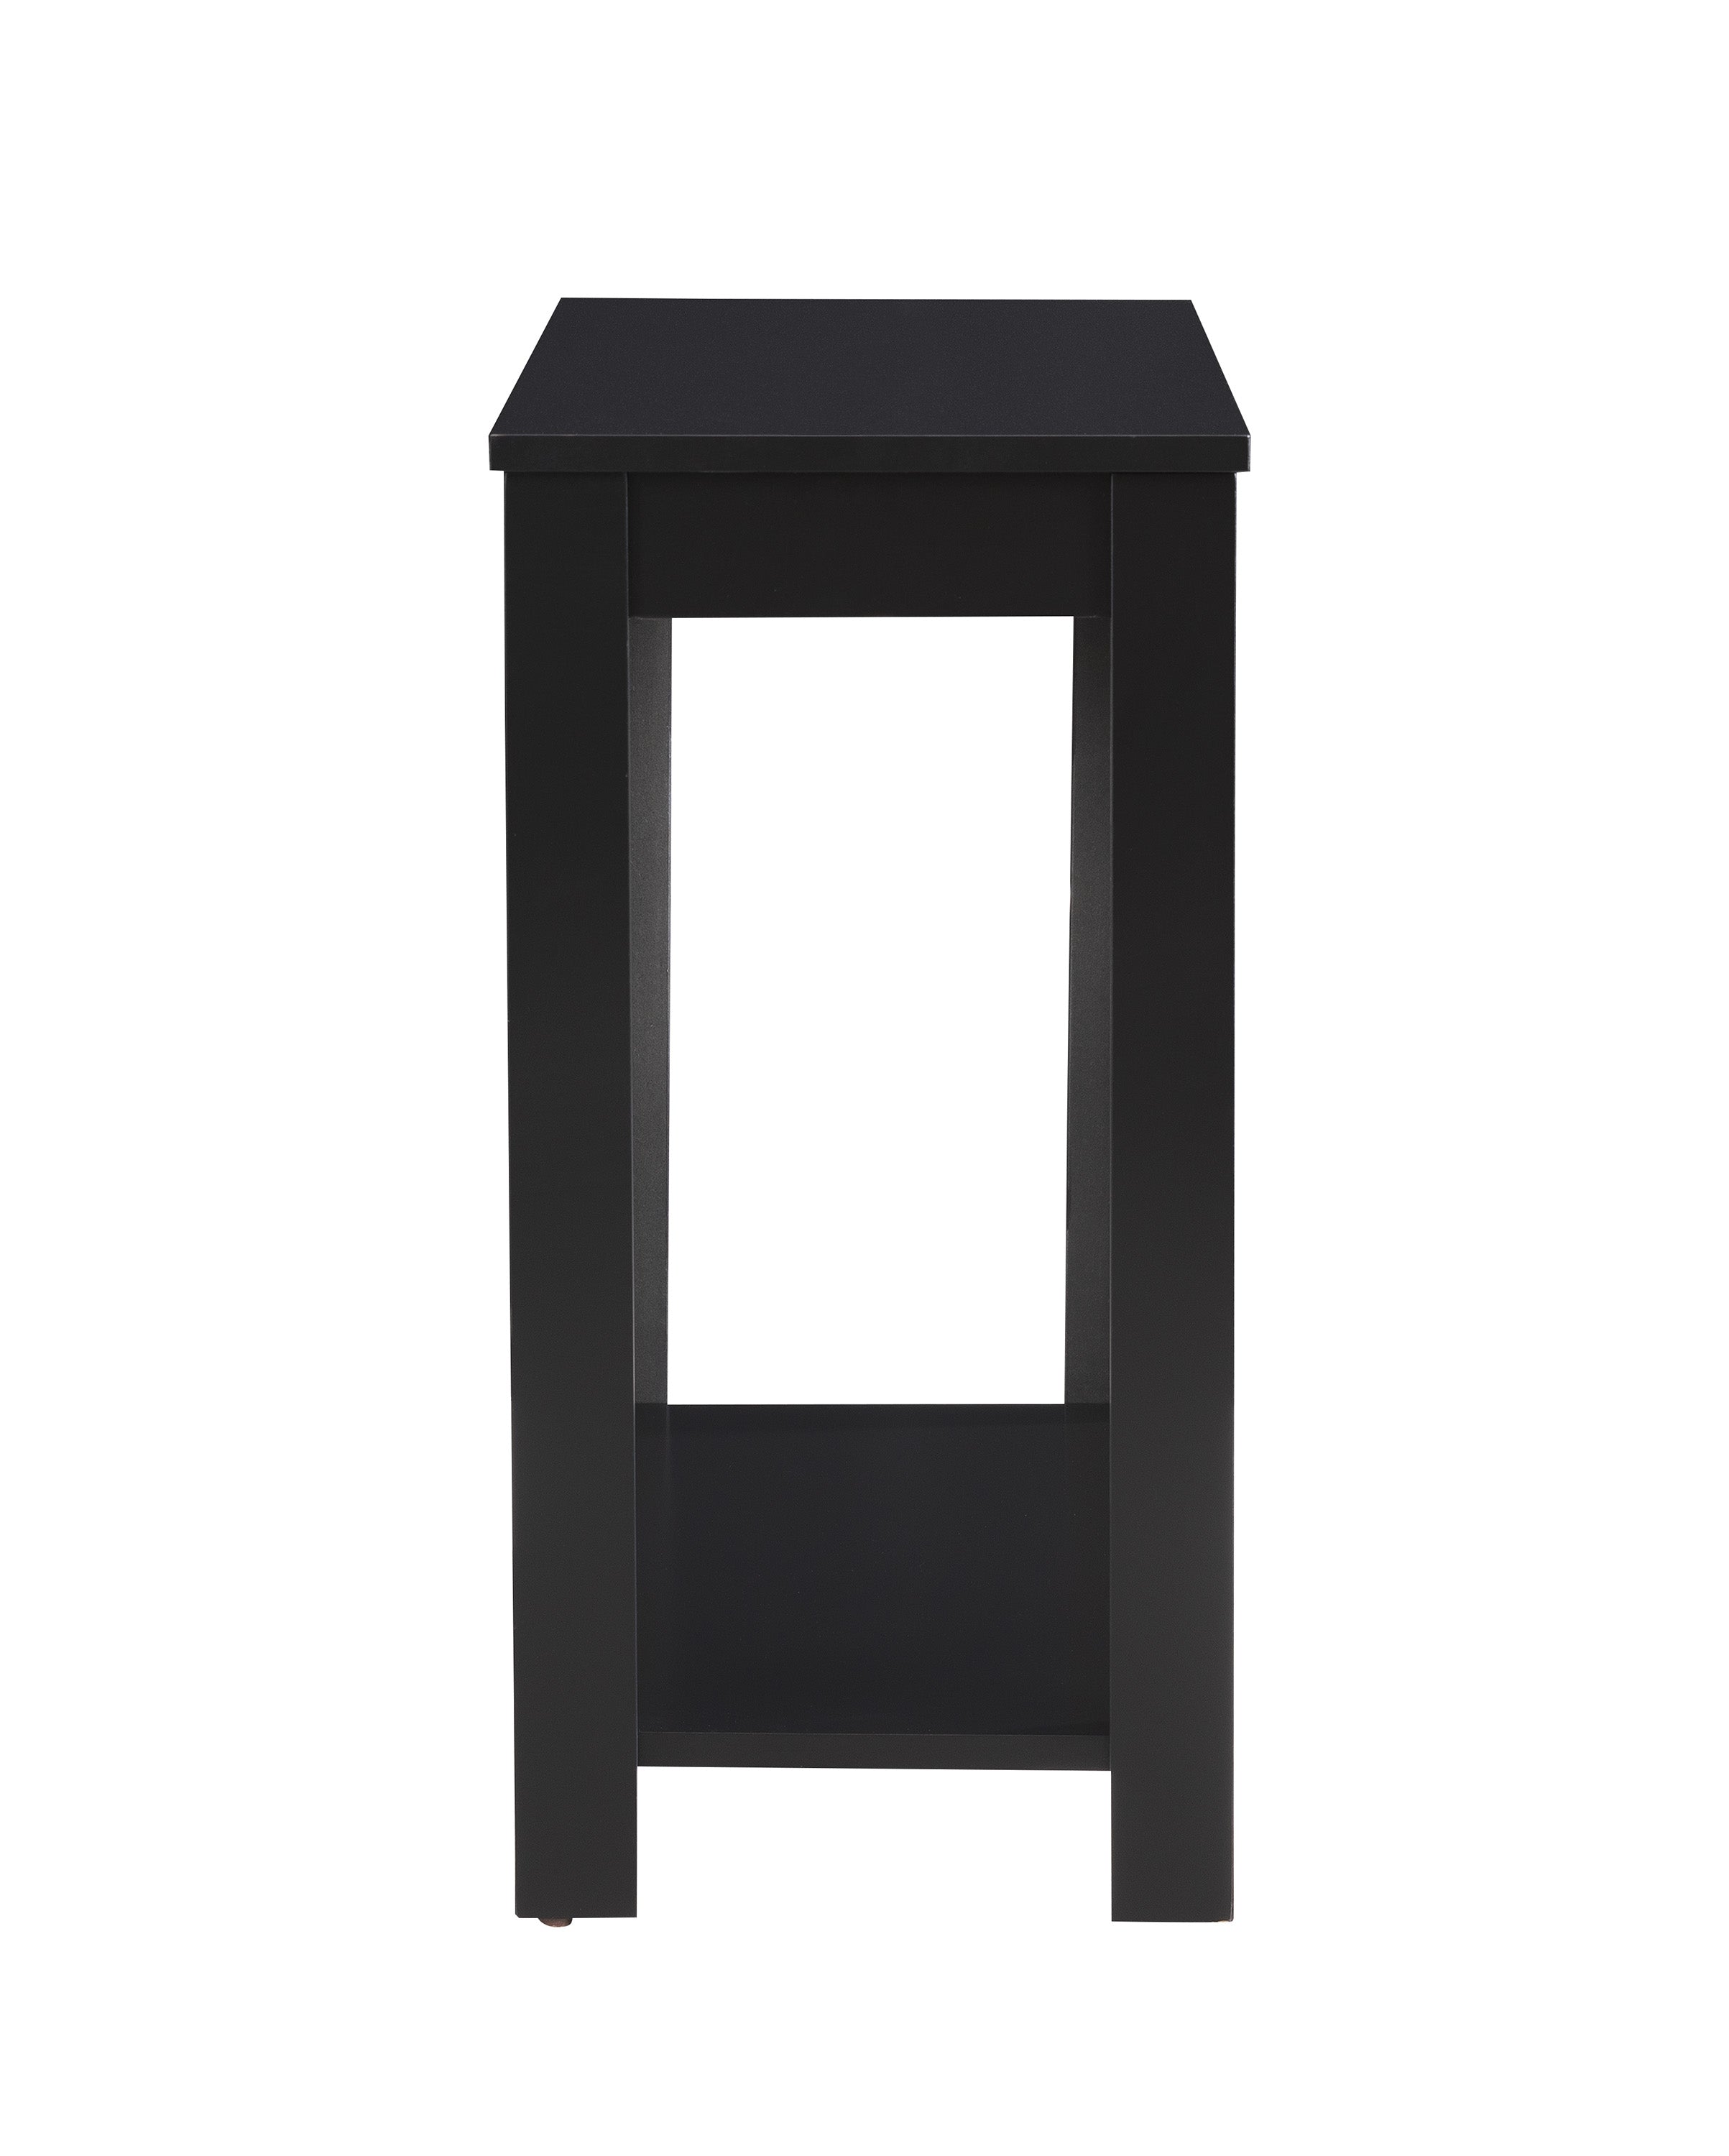 ZNTS Contemporary Chairside Table with Open Bottom Shelf 1Pc Side Table Black Finish Flat Table Top Solid B011119815